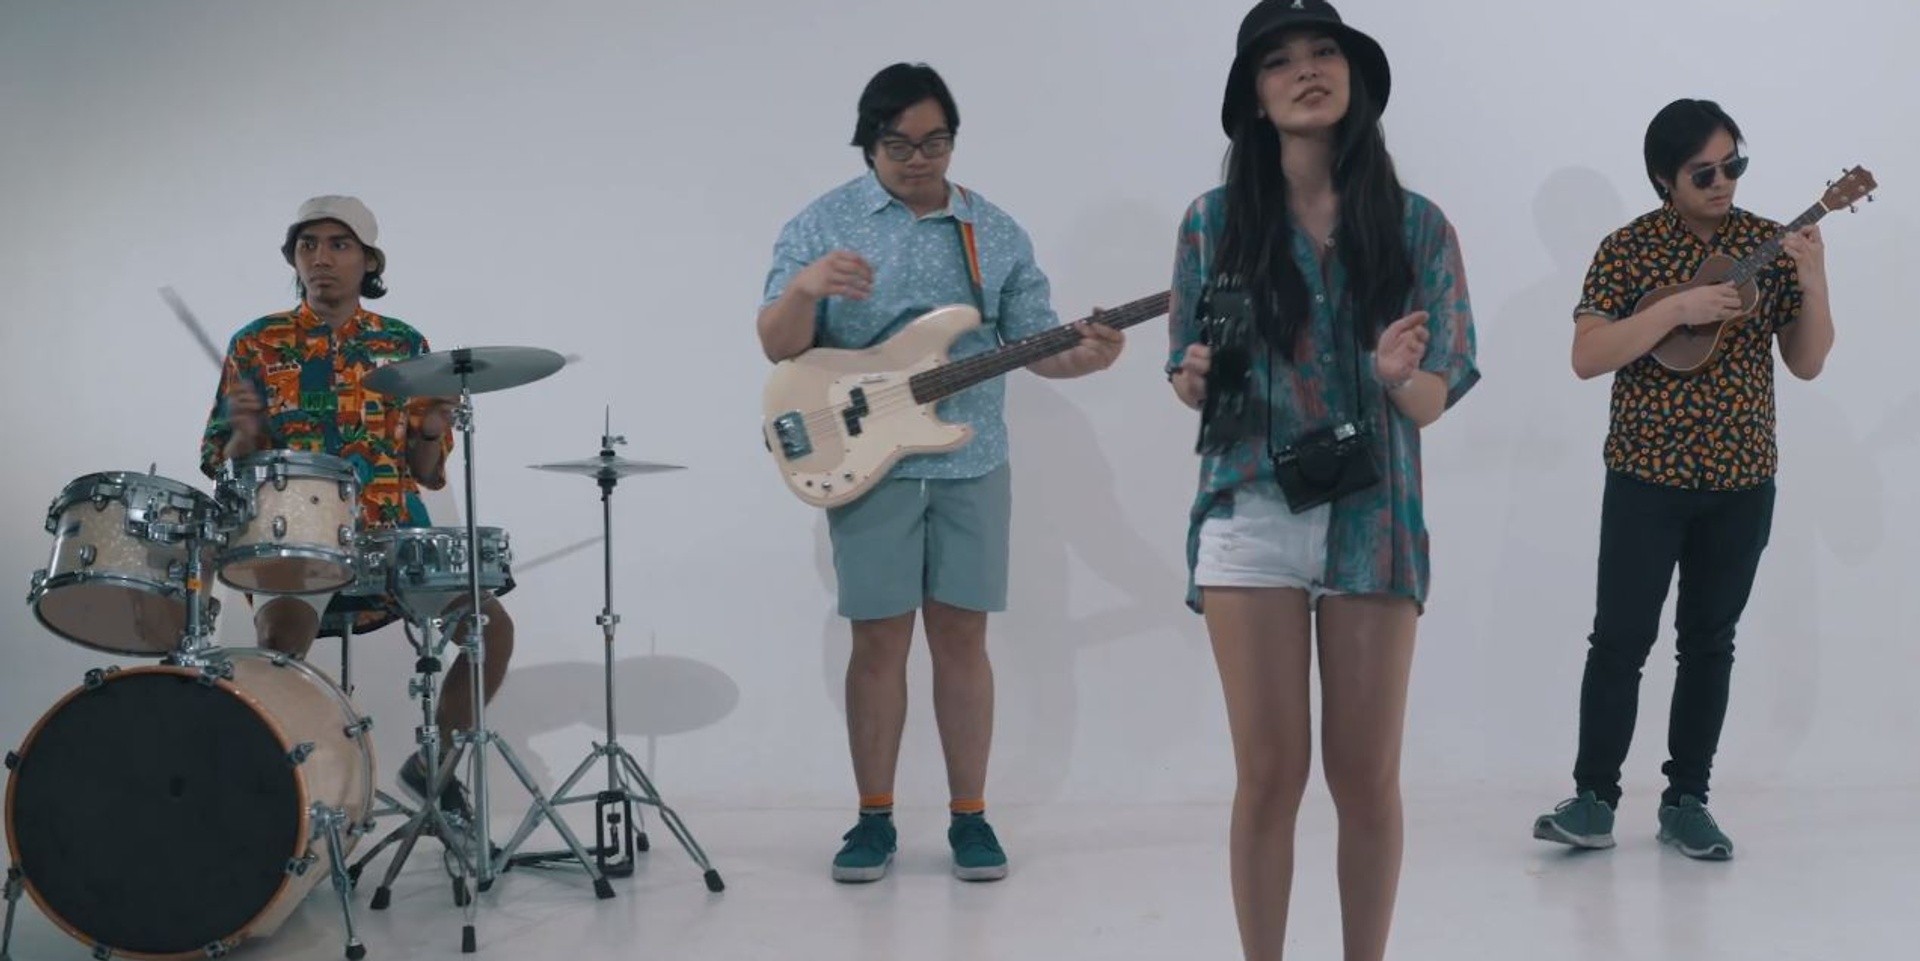 Garage Morning show off their fun side with 'Steps' music video – watch